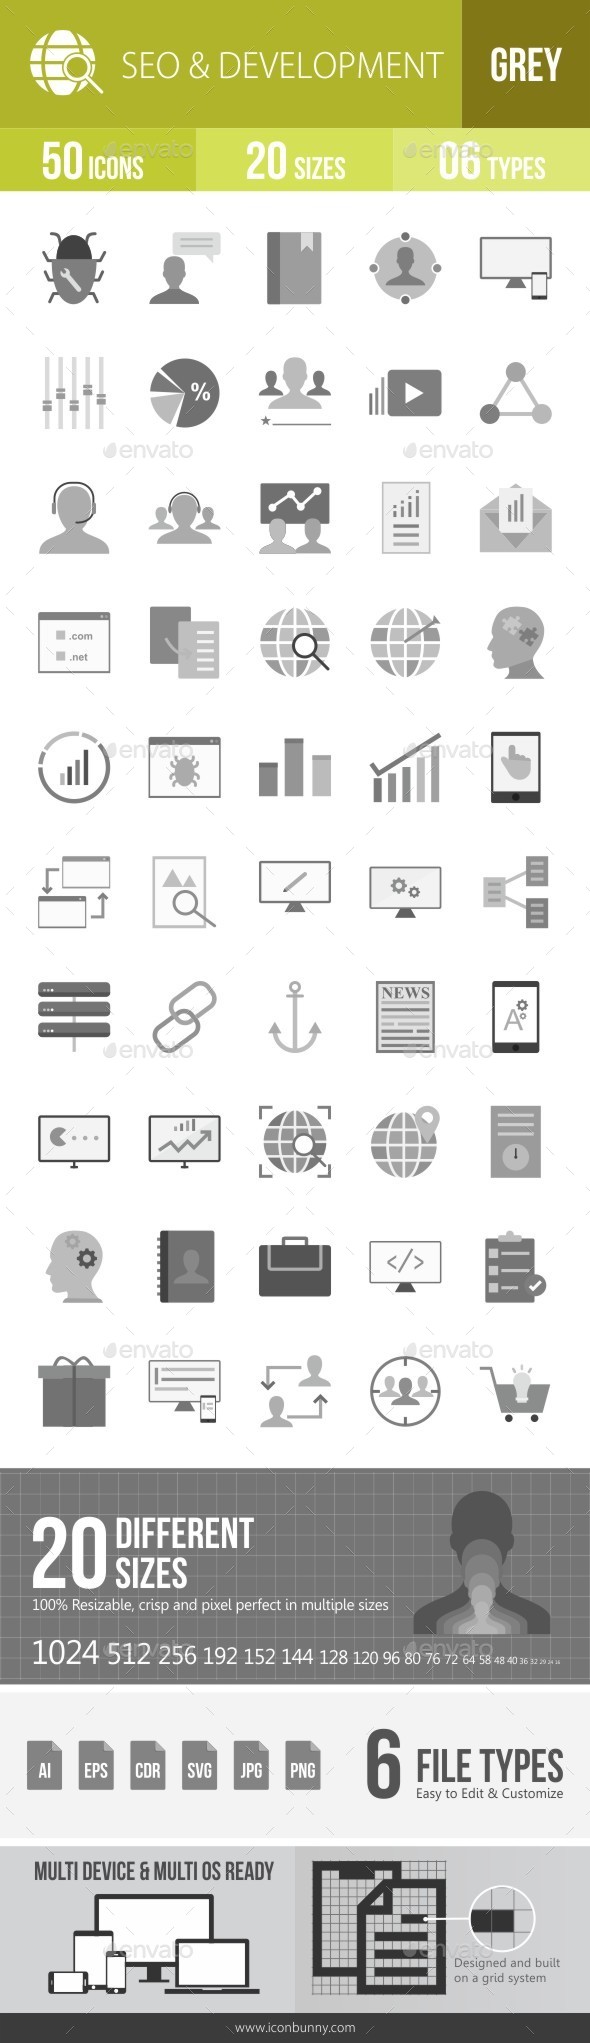 SEO & Development Services Greyscale Icons